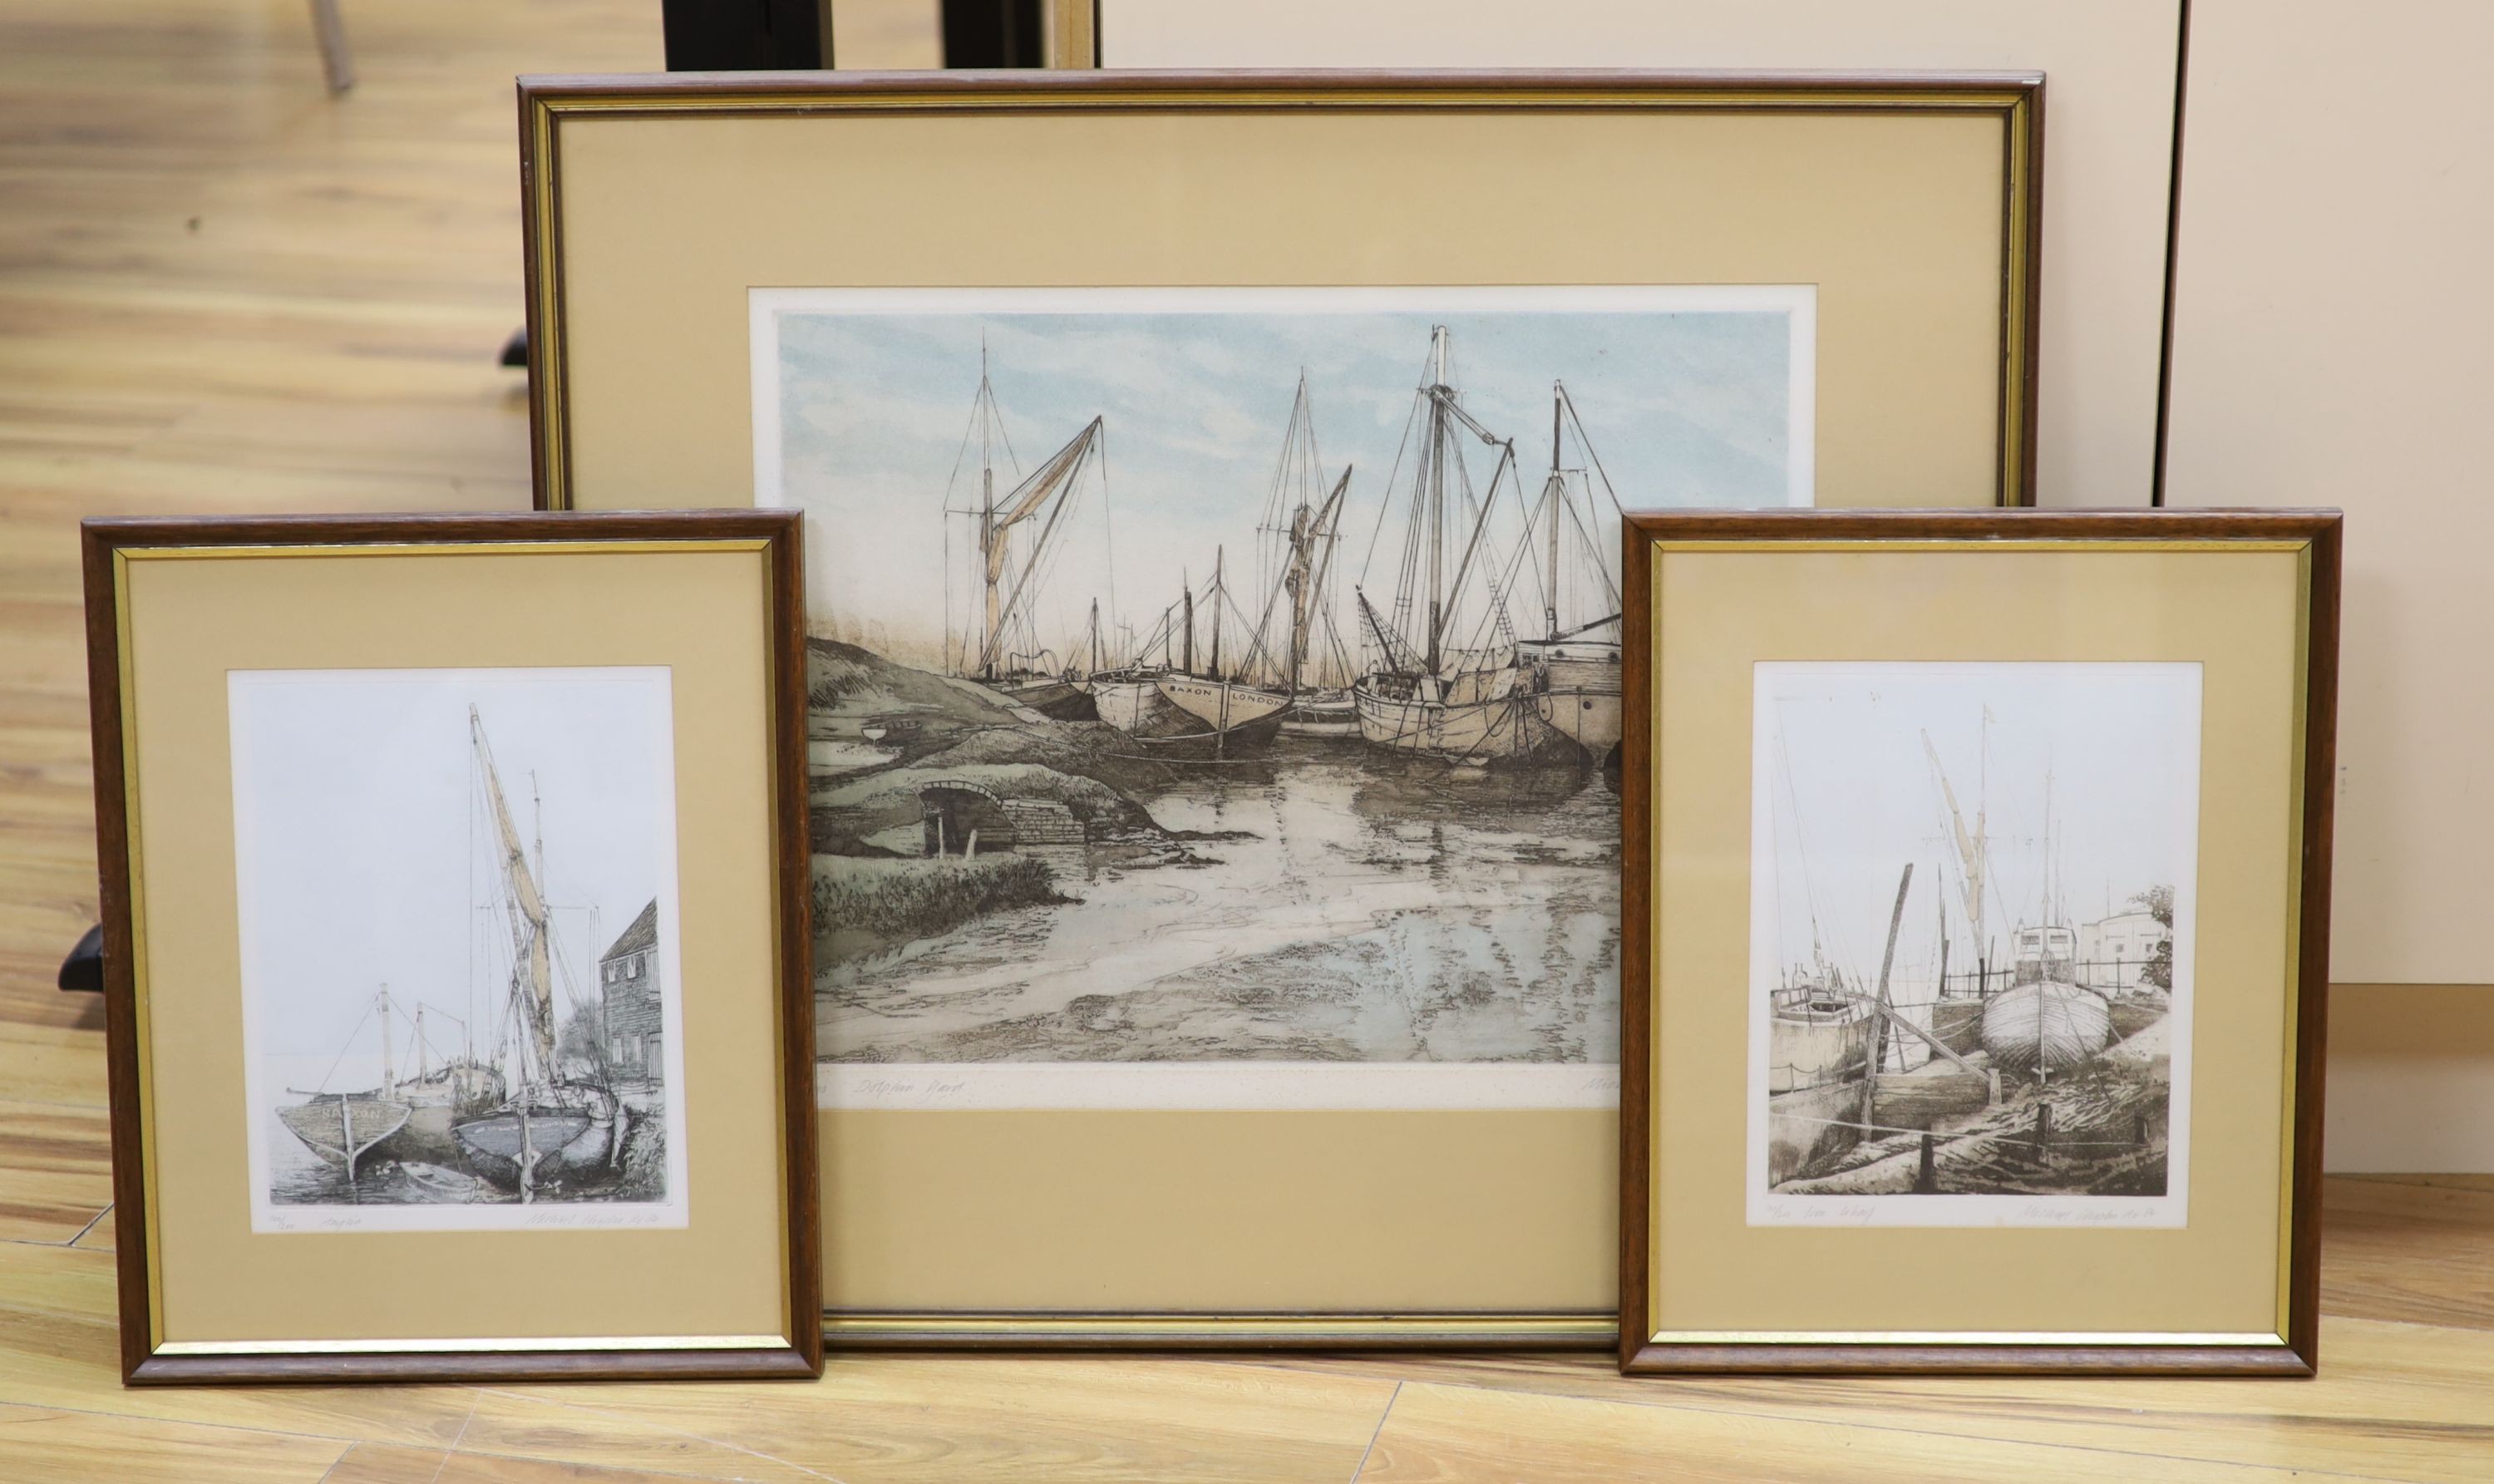 Michael Chaplin (b.1943), three coloured aquatints, 'Dolphin Yard', 'Iron Wharf' and 'Anglia', all signed in pencil, largest 36 x 47cm